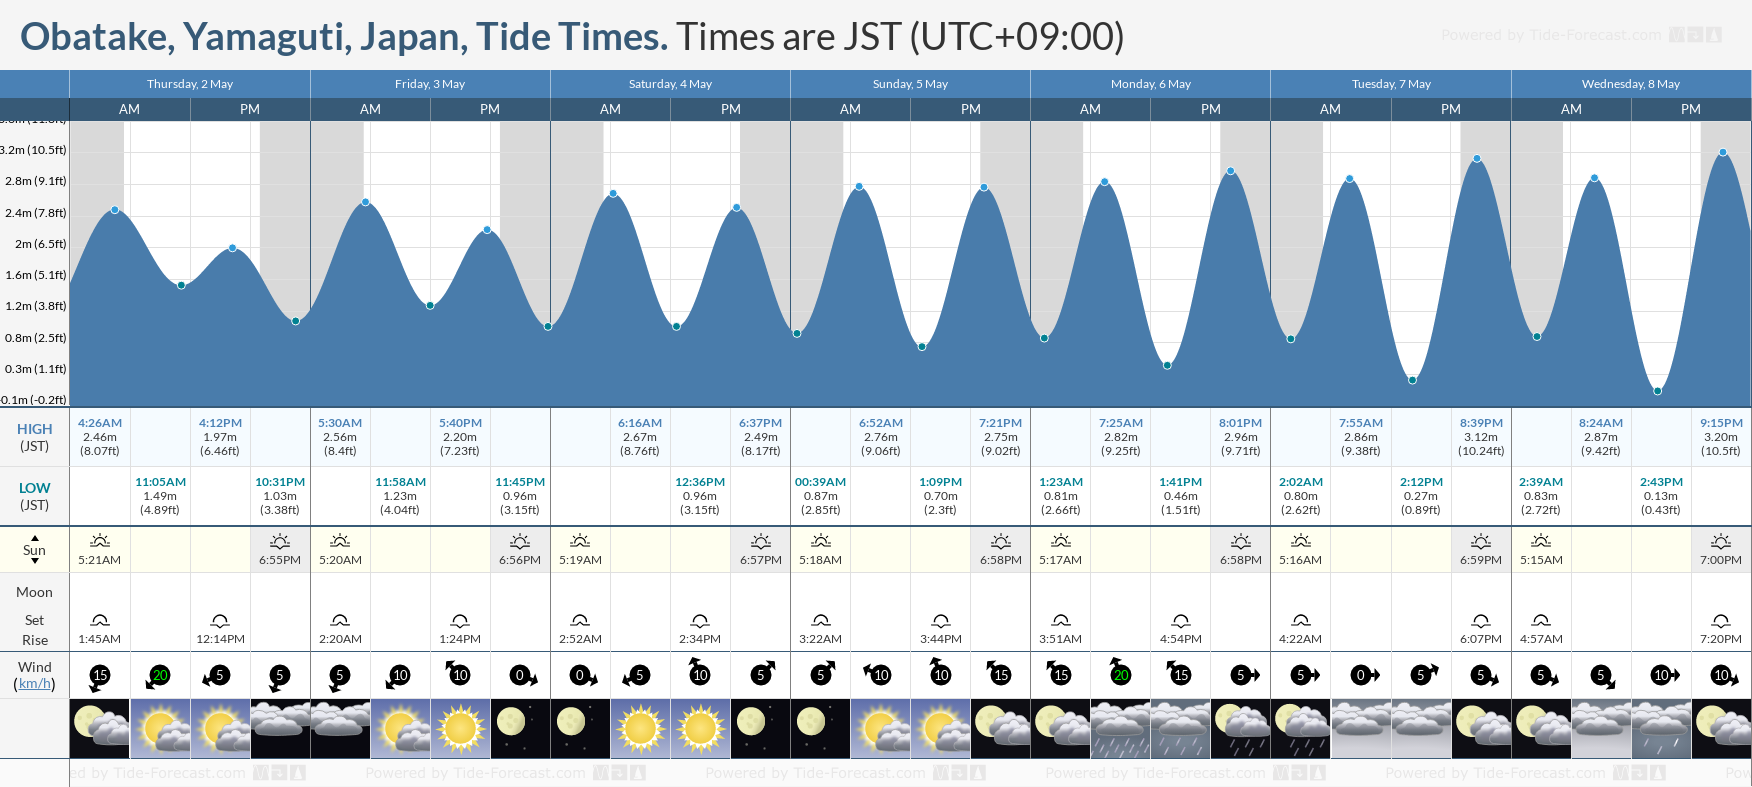 Obatake, Yamaguti, Japan Tide Chart including high and low tide tide times for the next 7 days